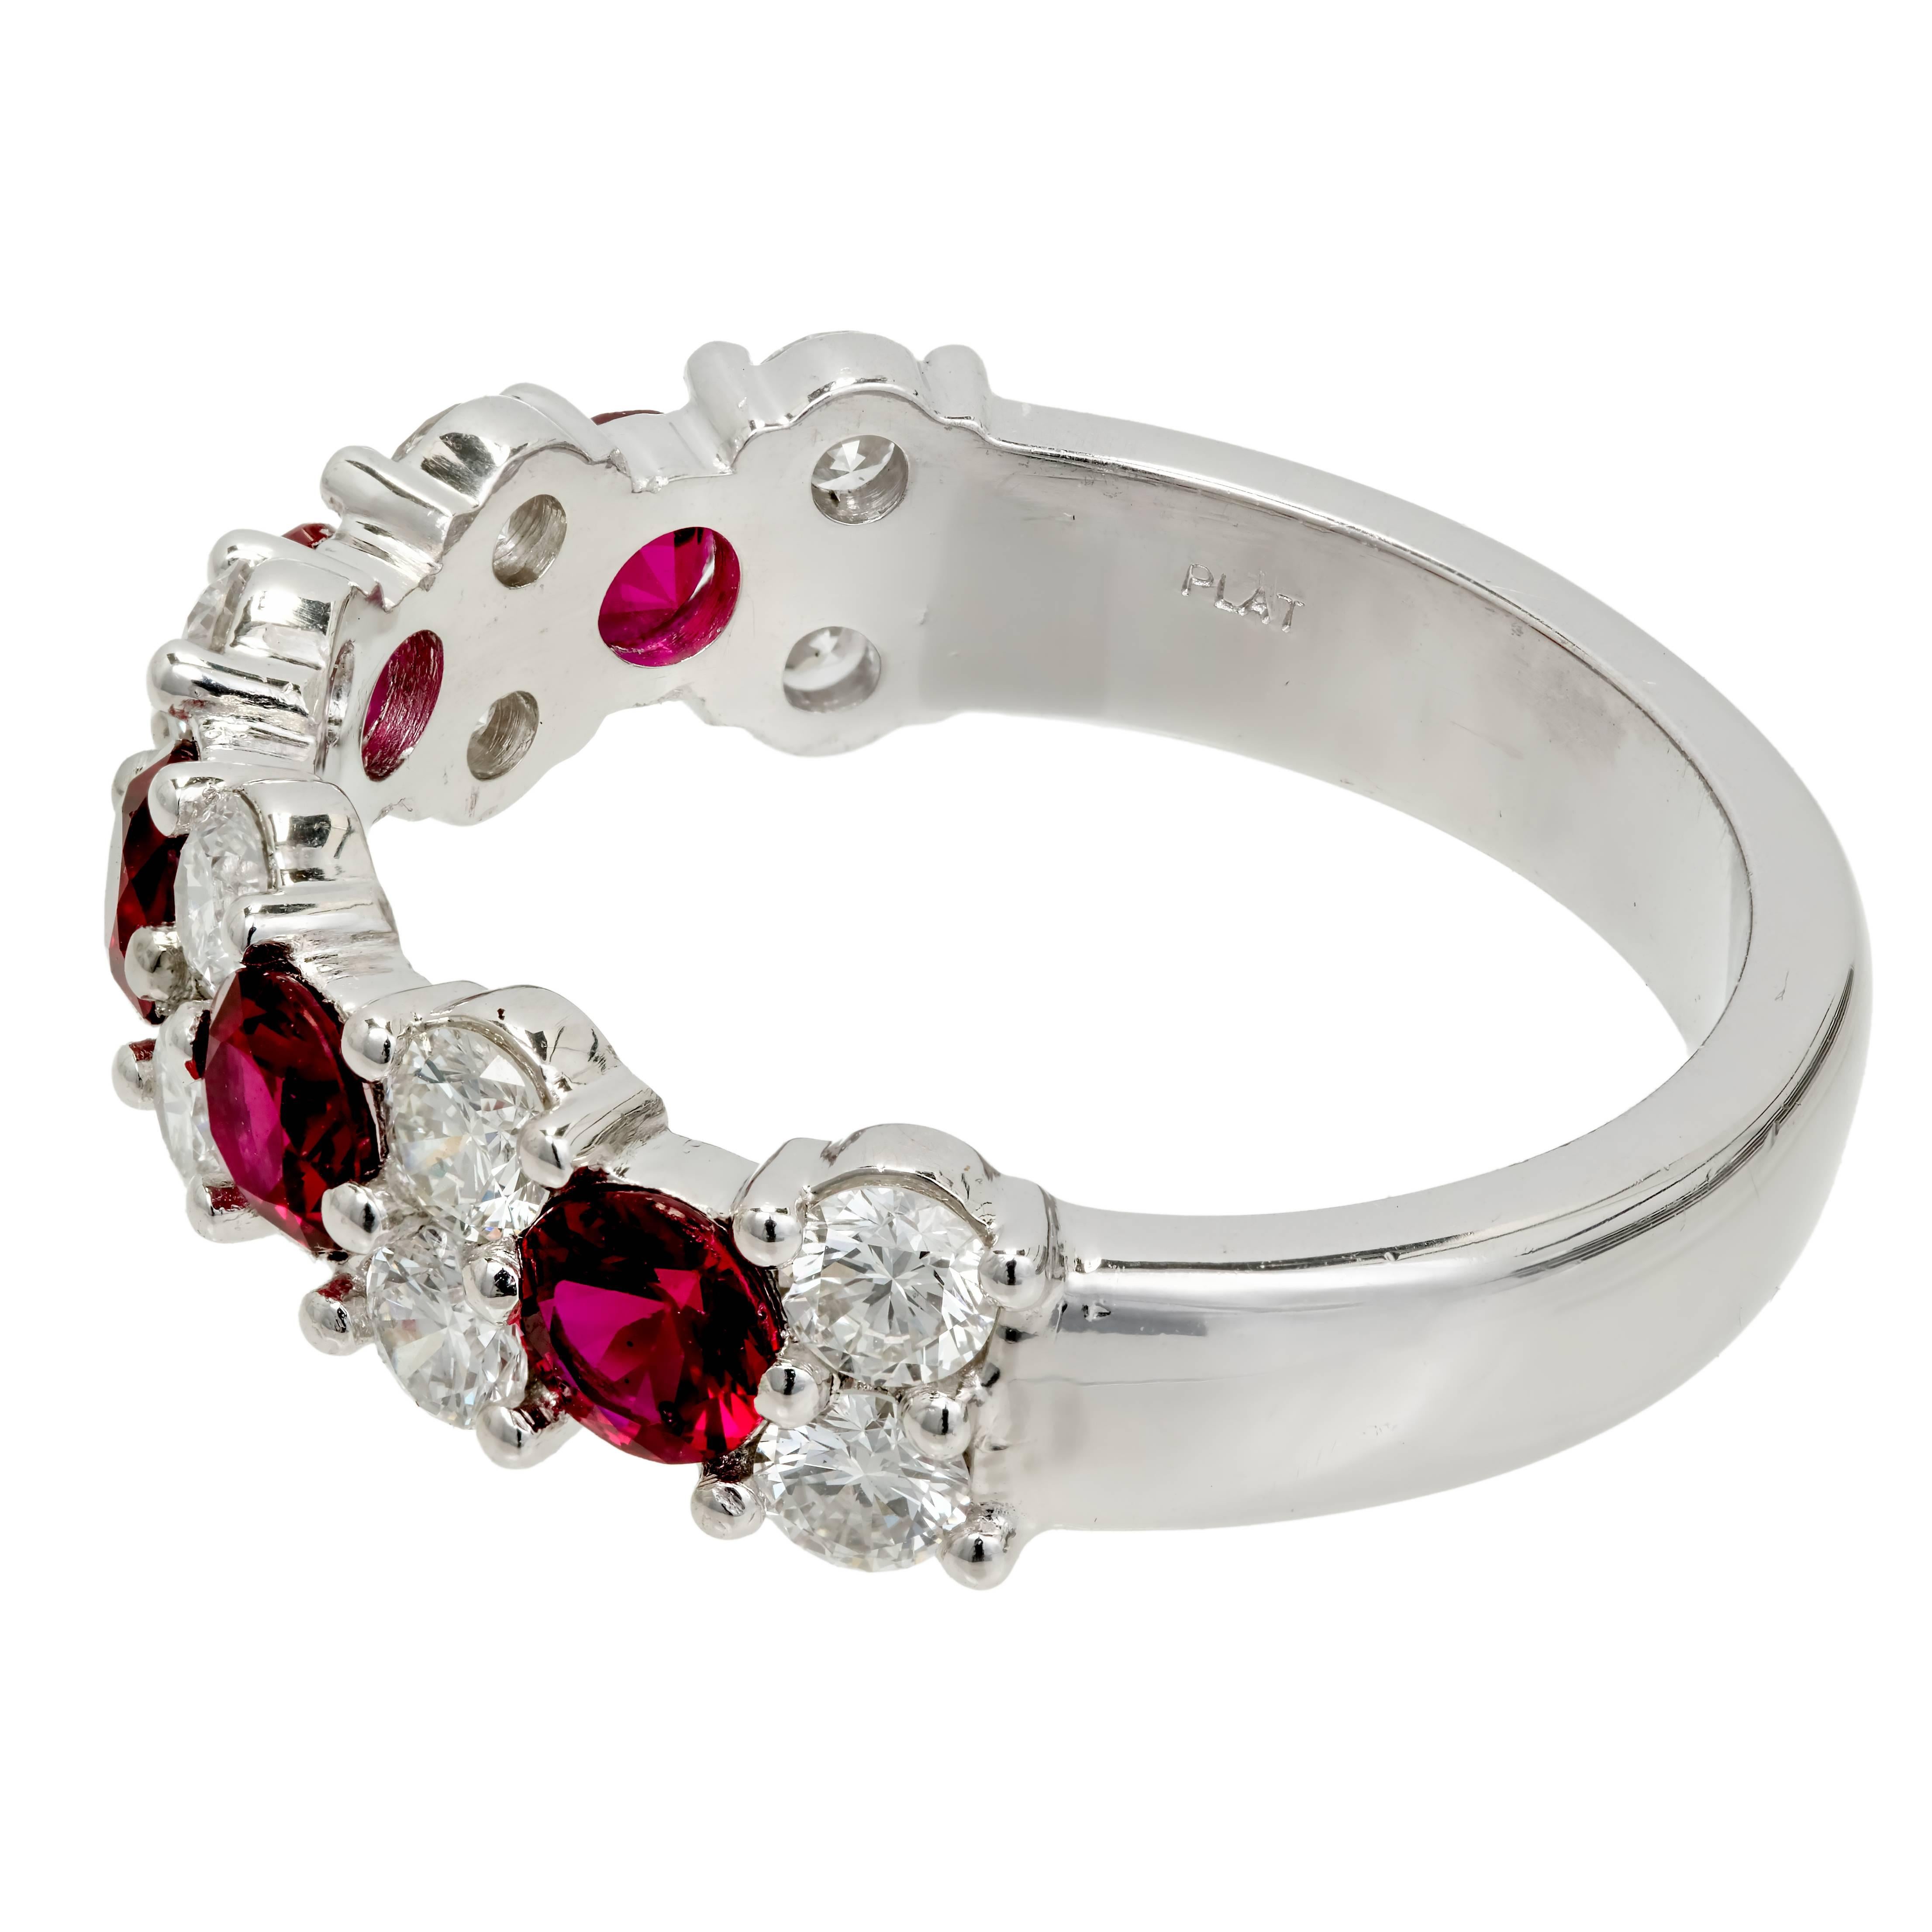 Peter Suchy 1.73 Carat Ruby Diamond Platinum Wedding Band Ring For Sale ...